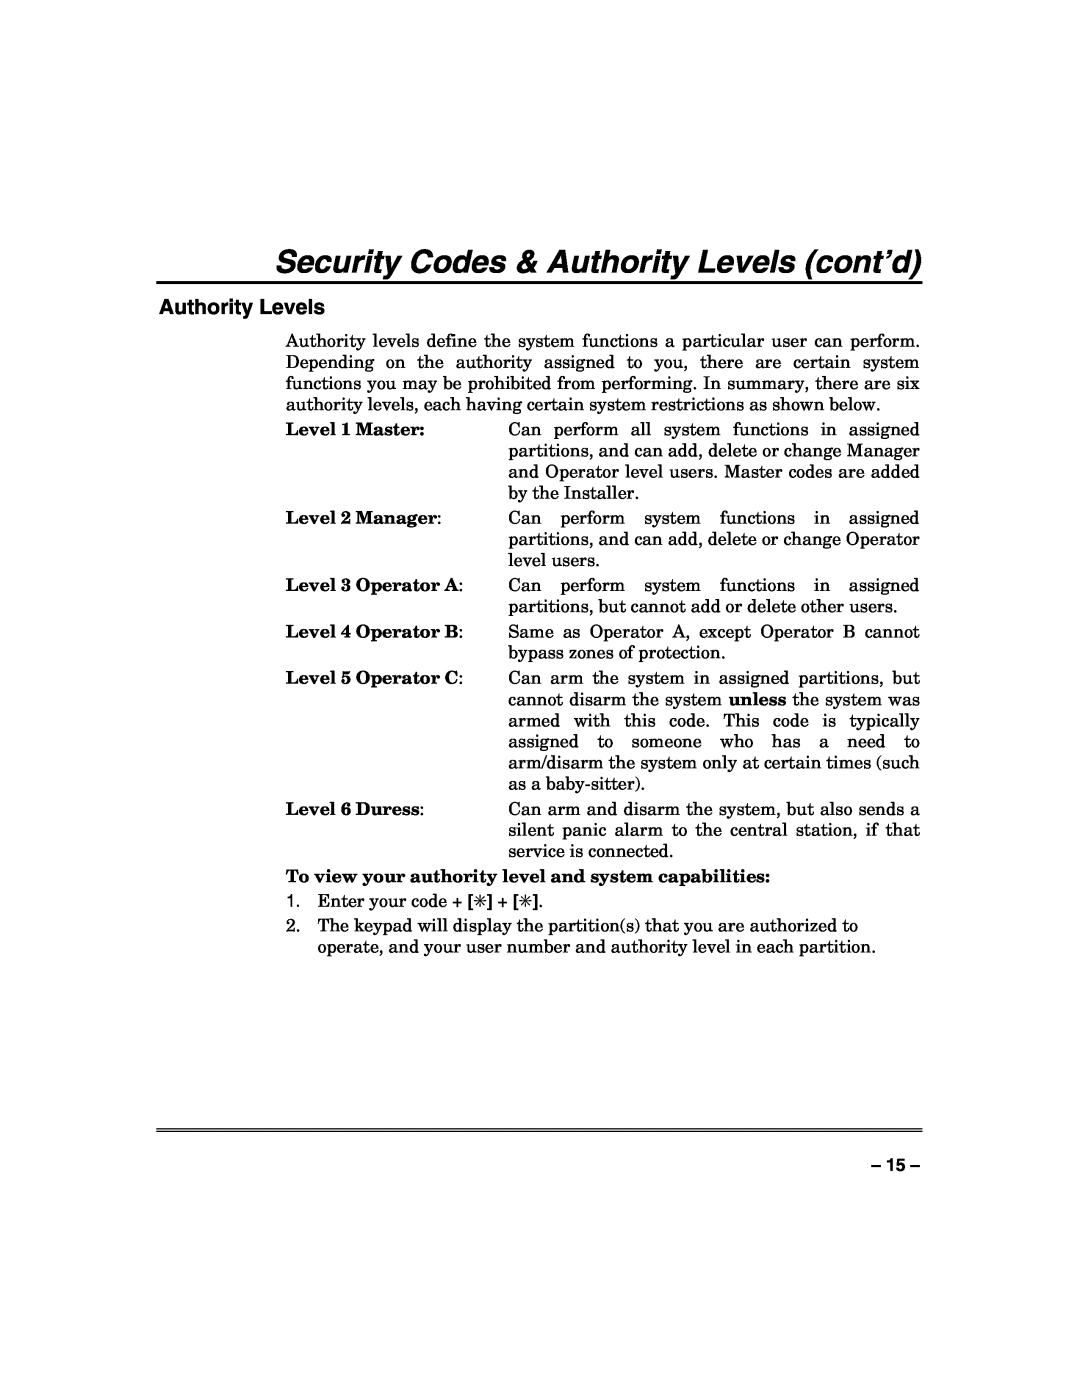 Honeywell N7003V3 manual Security Codes & Authority Levels cont’d, Level 1 Master, Level 2 Manager, Level 3 Operator A 